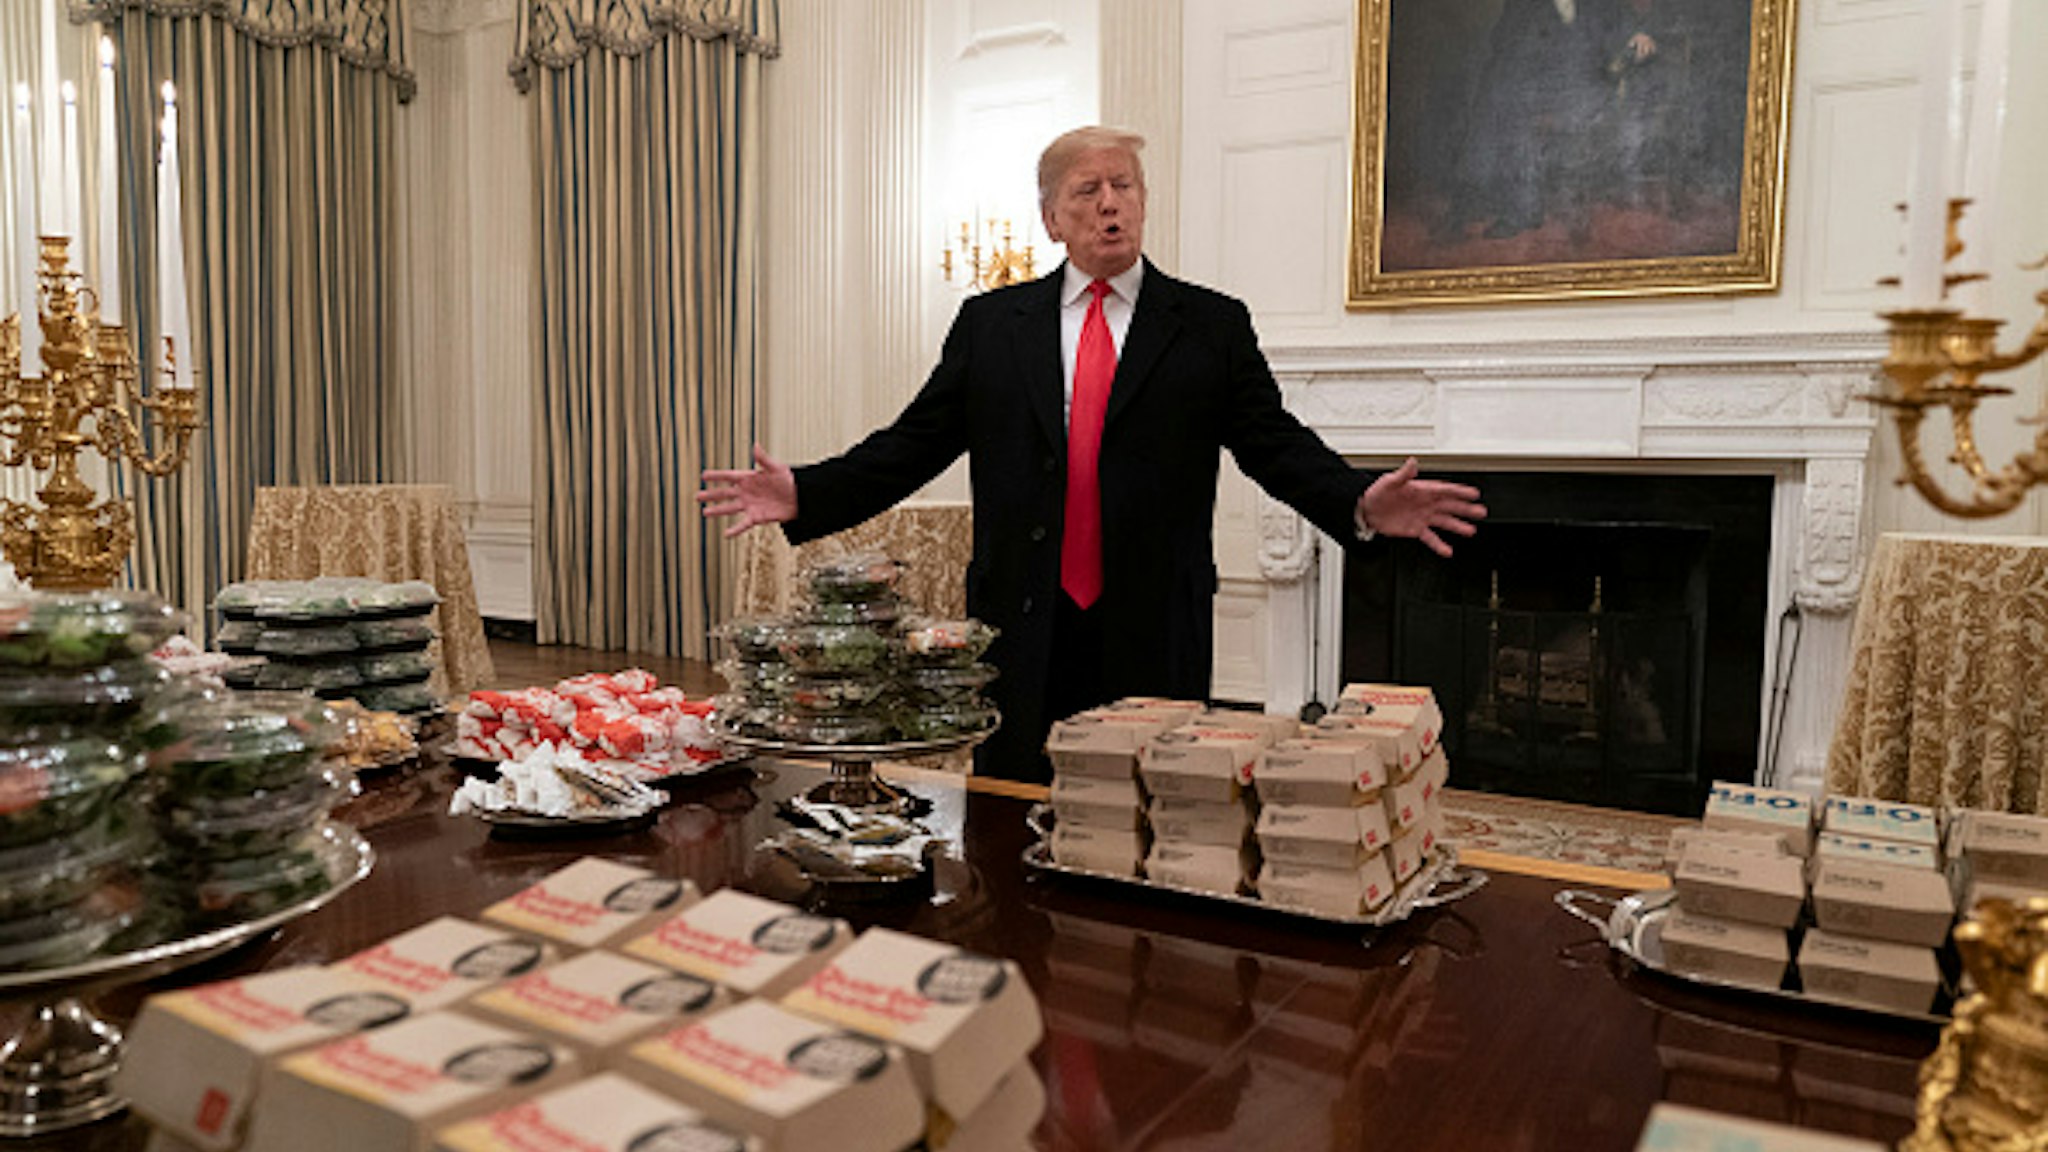 WASHINGTON, DC - JANUARY 14: (AFP OUT) U.S President Donald Trump presents fast food to be served to the Clemson Tigers football team to celebrate their Championship at the White House on January 14, 2019 in Washington, DC.